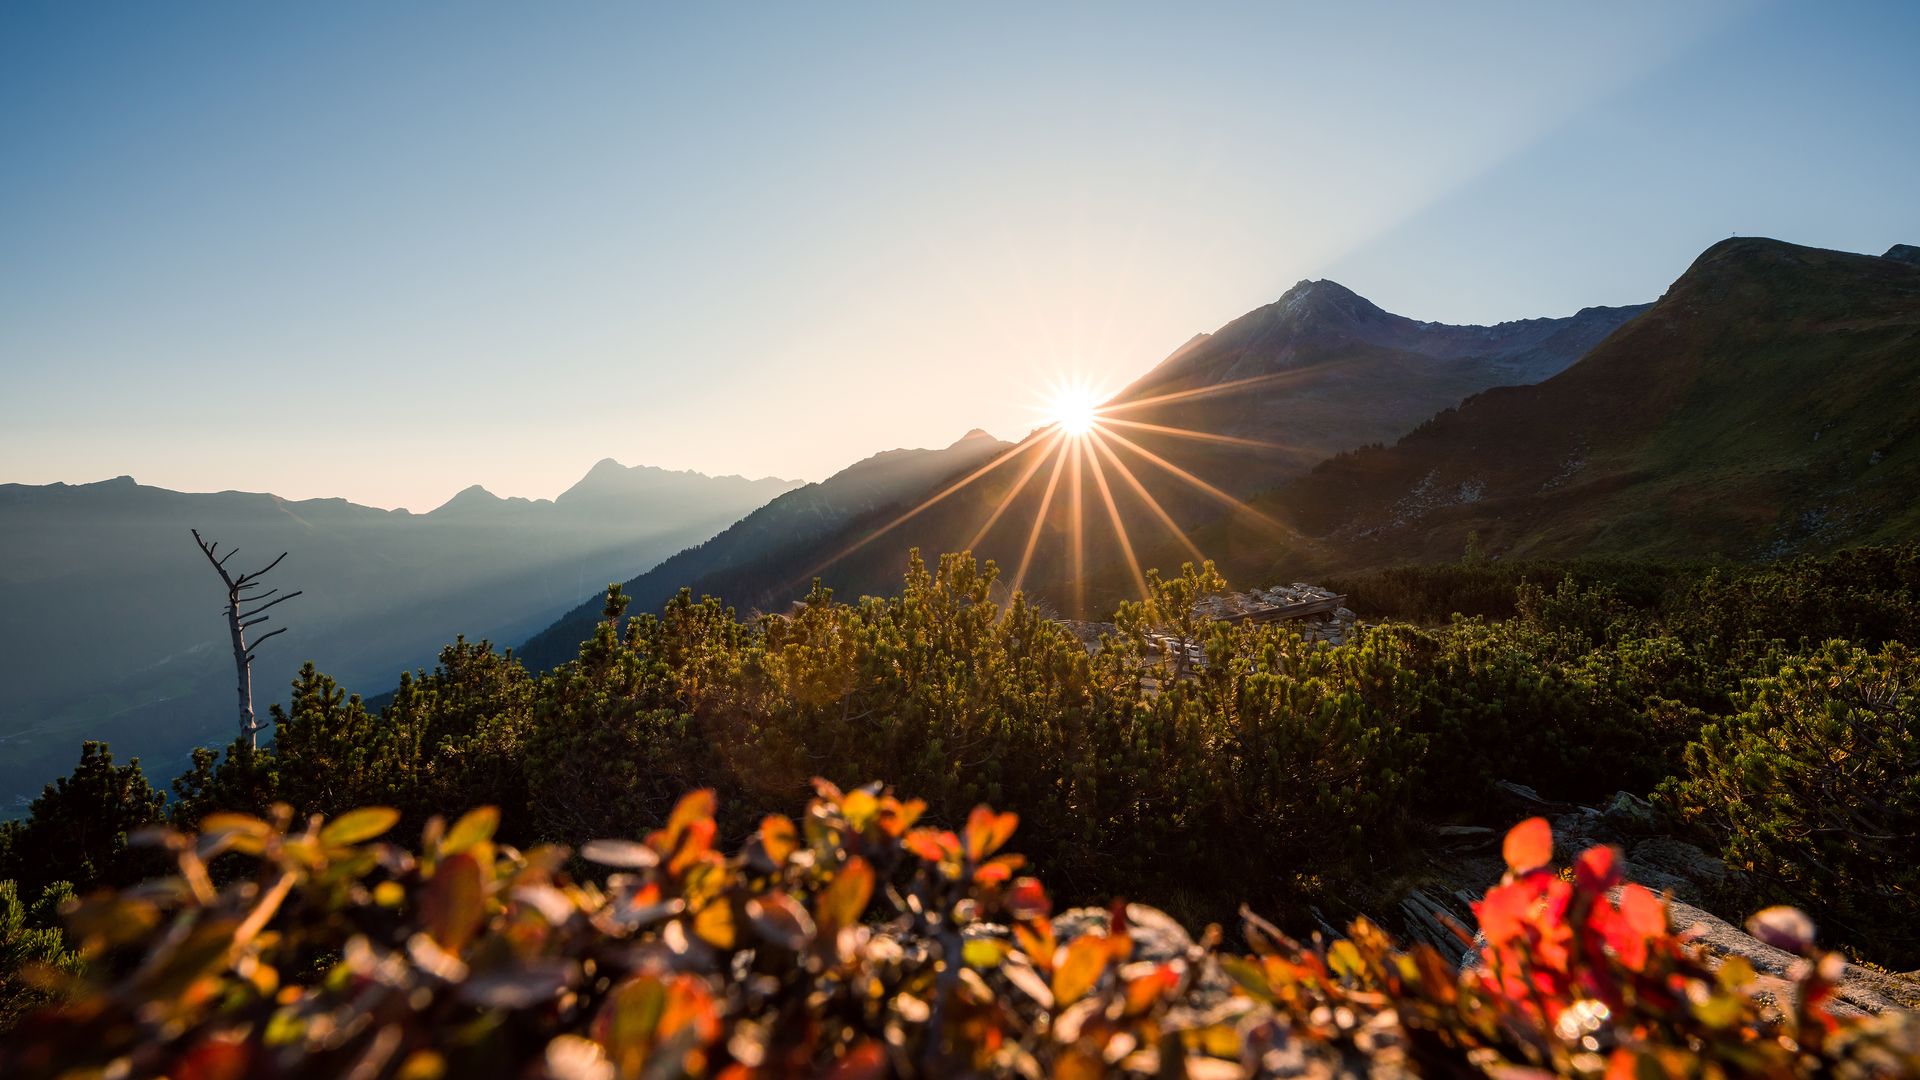 The maple shines in the golden light of the Zillertal mountain autumn.